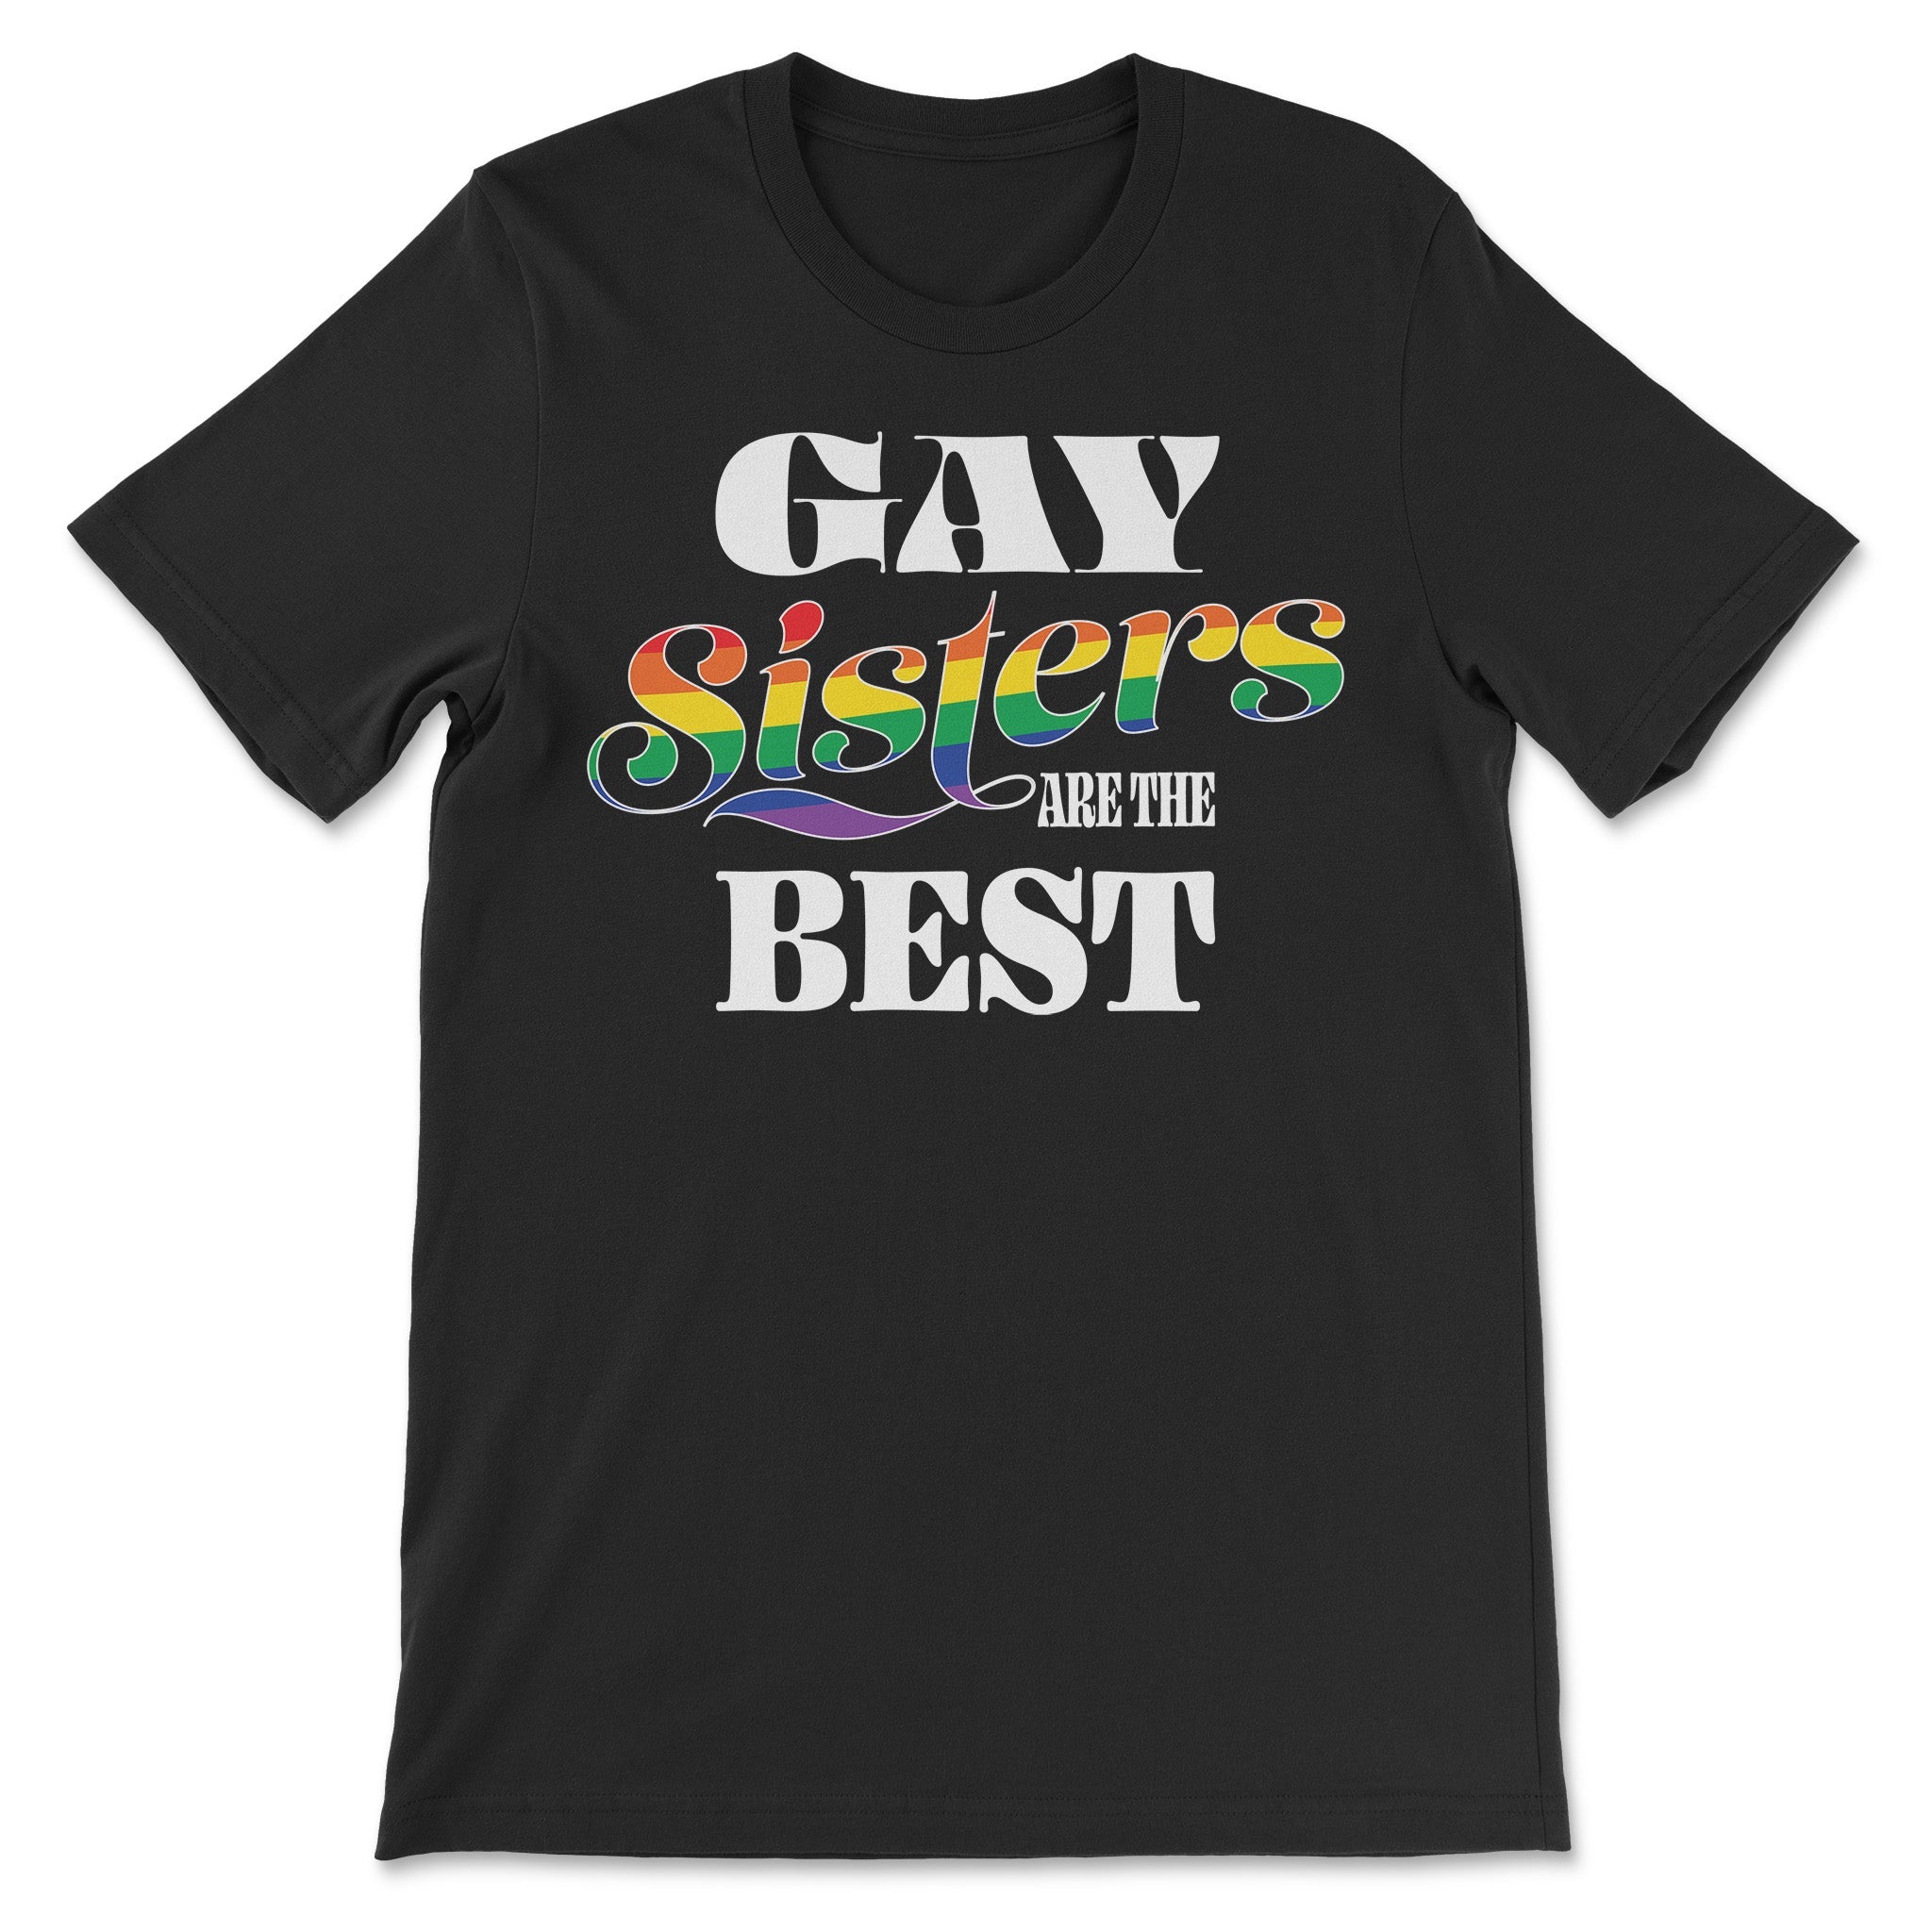 "Gay Sisters are the Best" - Celebration T-Shirt - Hunky Tops